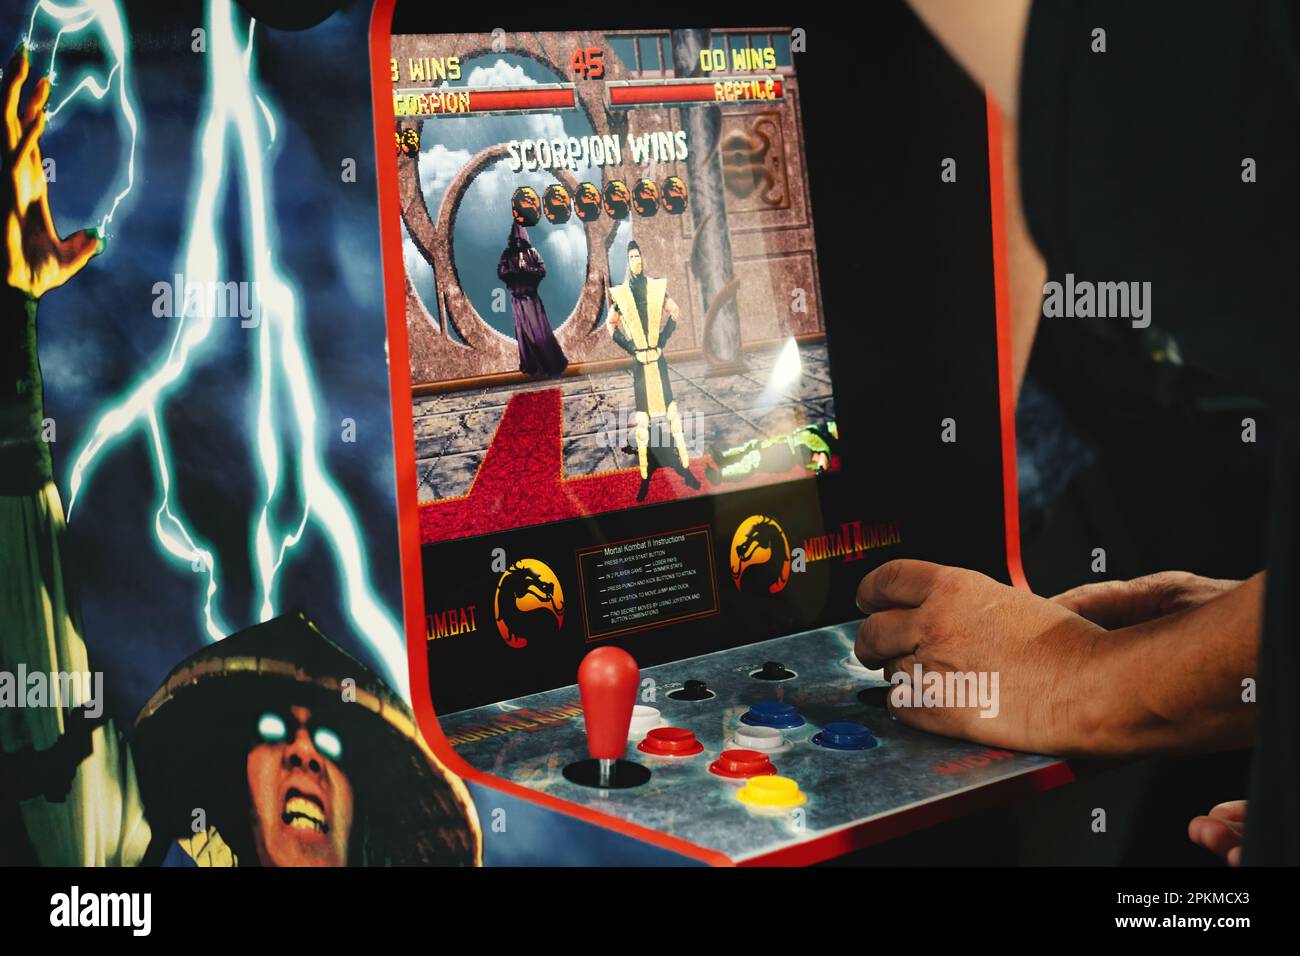 Close-up of an old retro gaming arcade game - Mortal Kombat II, with a man's hands on the cabinet control panel Stock Photo